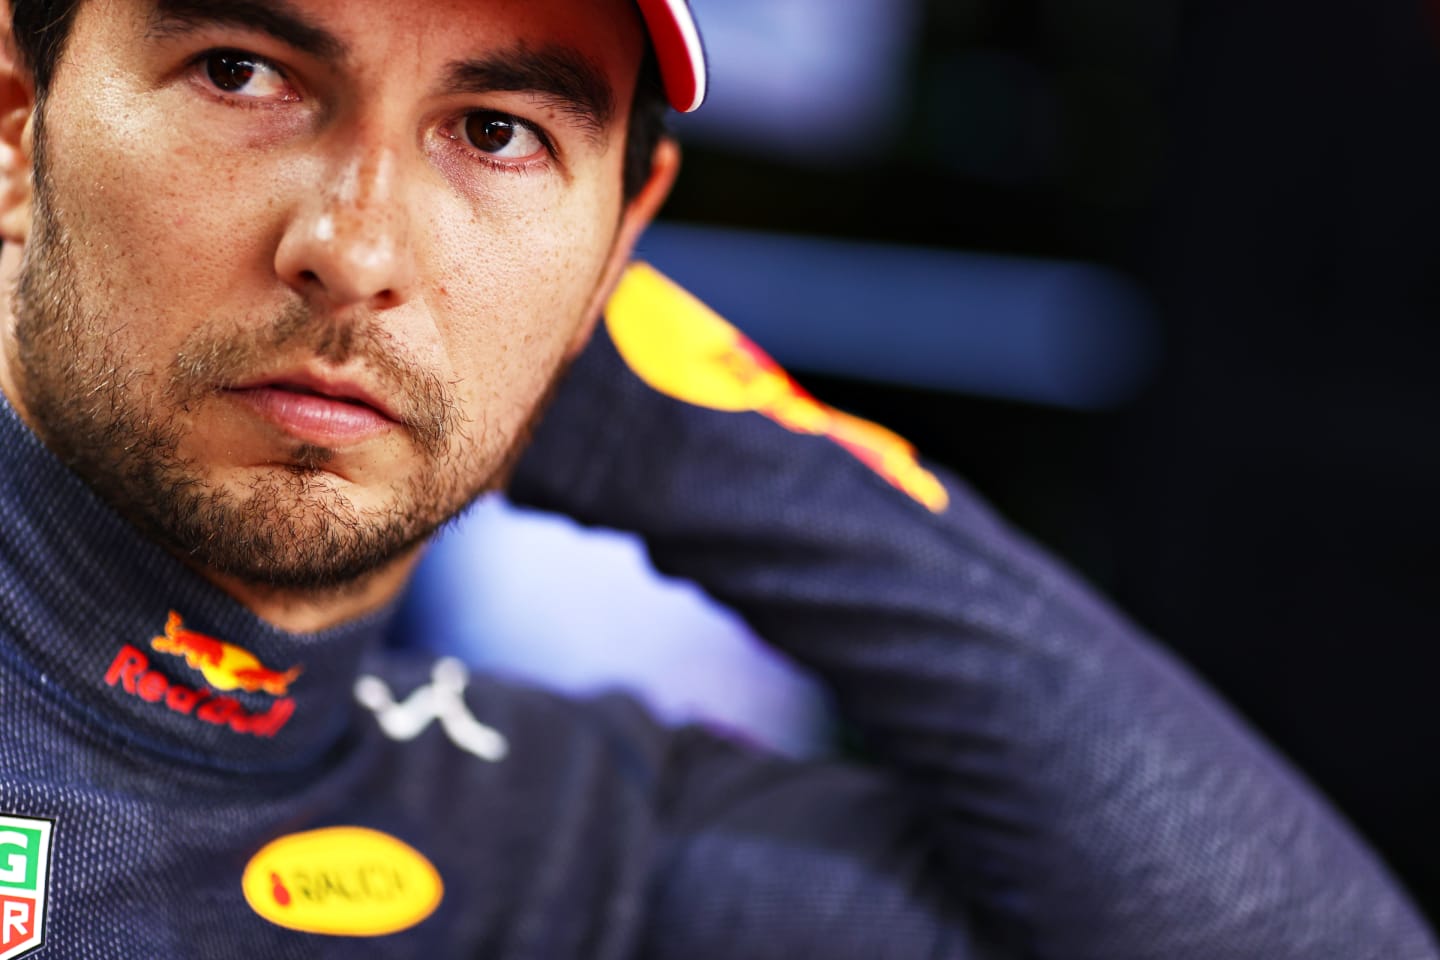 DOHA, QATAR - NOVEMBER 21: Sergio Perez of Mexico and Red Bull Racing prepares to drive in the garage before the F1 Grand Prix of Qatar at Losail International Circuit on November 21, 2021 in Doha, Qatar. (Photo by Mark Thompson/Getty Images)